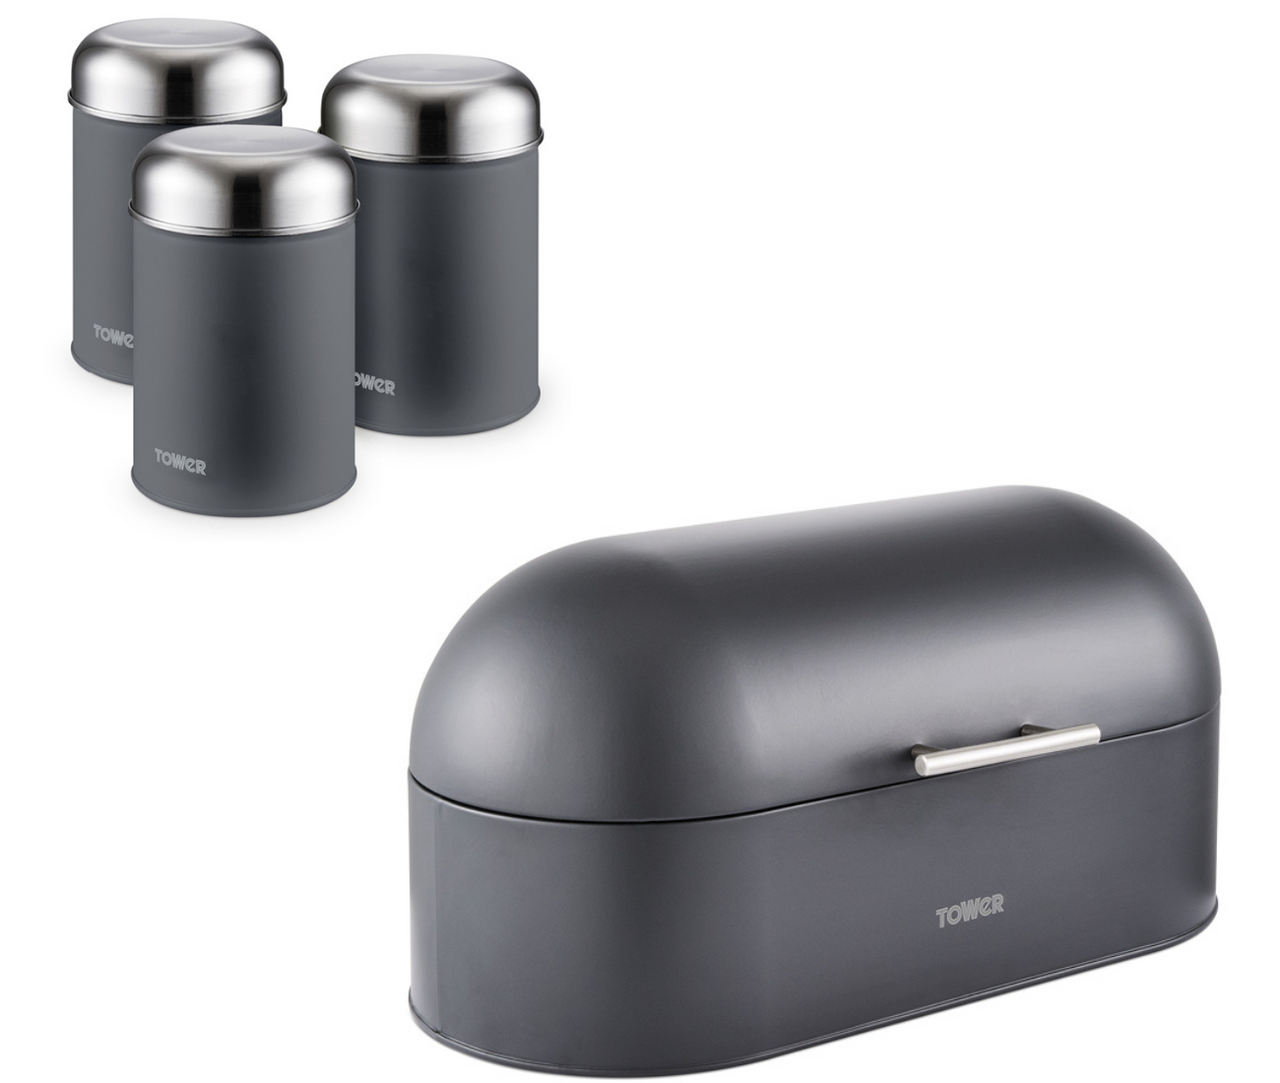 Tower Infinity Slate Grey Bread Bin & 3 Canisters Matching Kitchen Storage Set